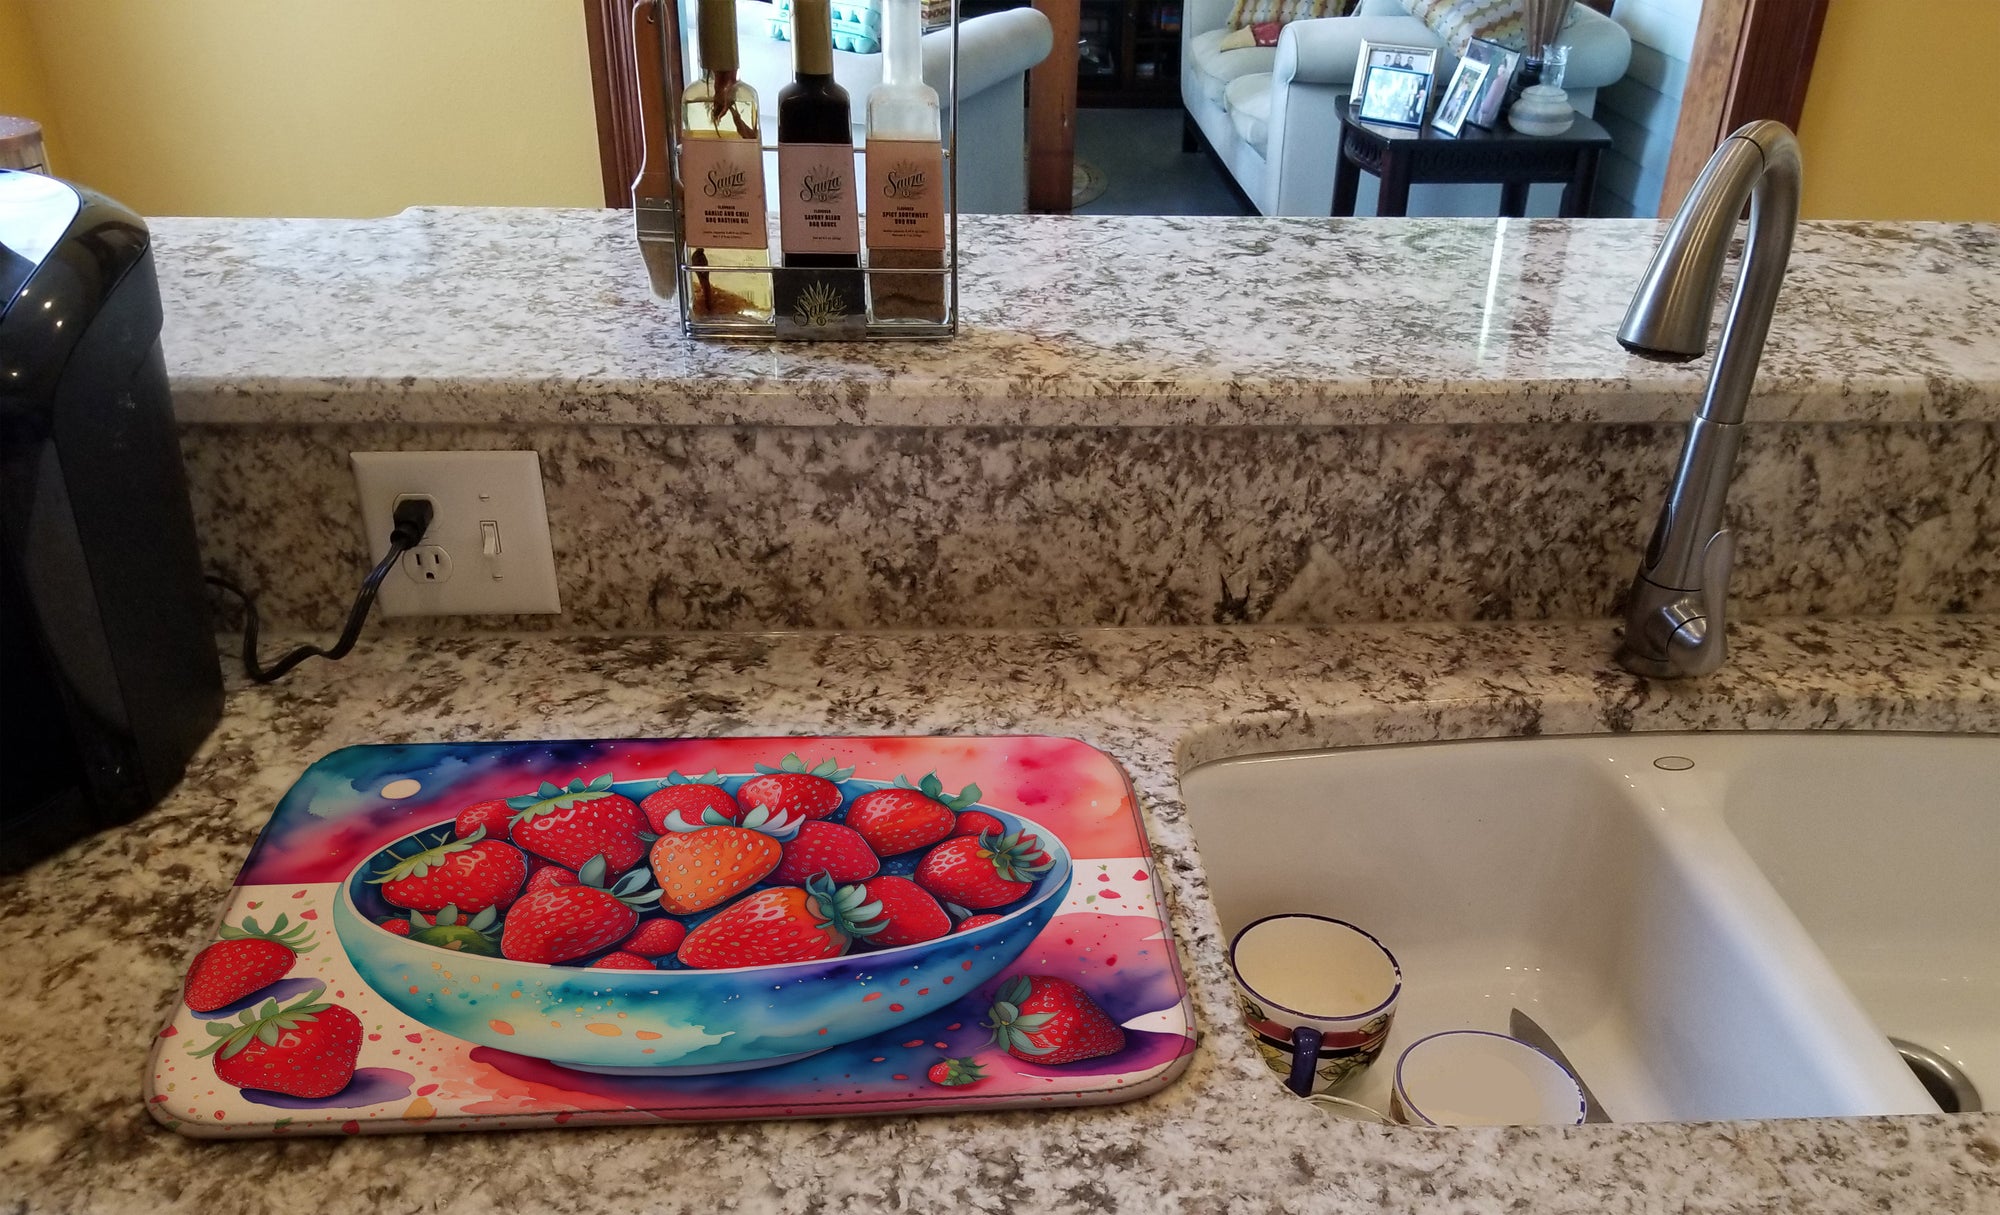 Buy this Colorful Strawberries Dish Drying Mat